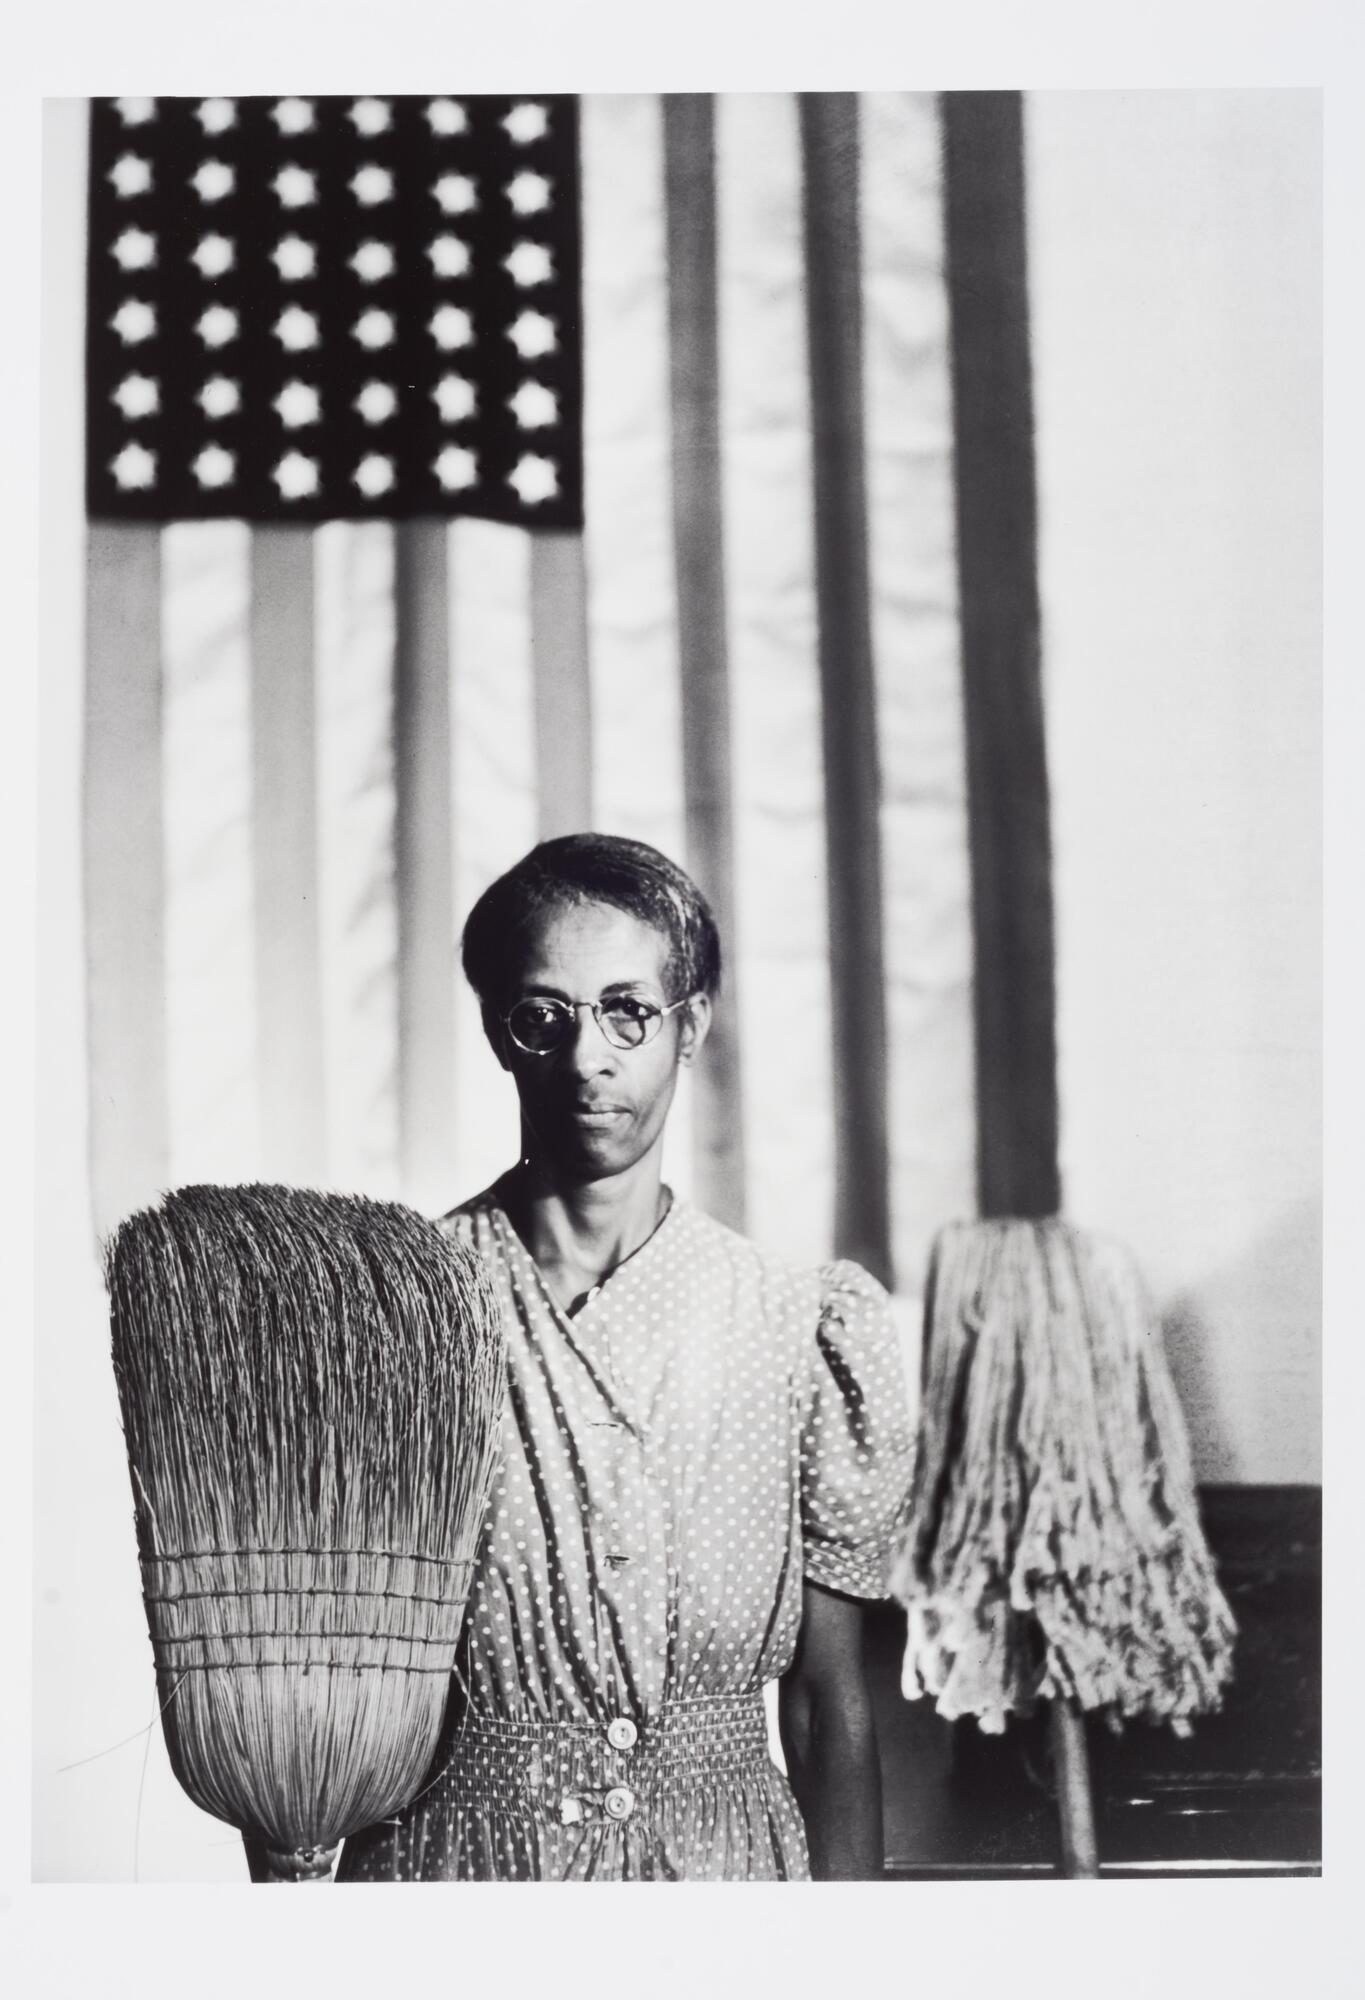 A person wearing a buttoned, polka-dot dress. They are standing in front of an American flag and behind a mop and broom.